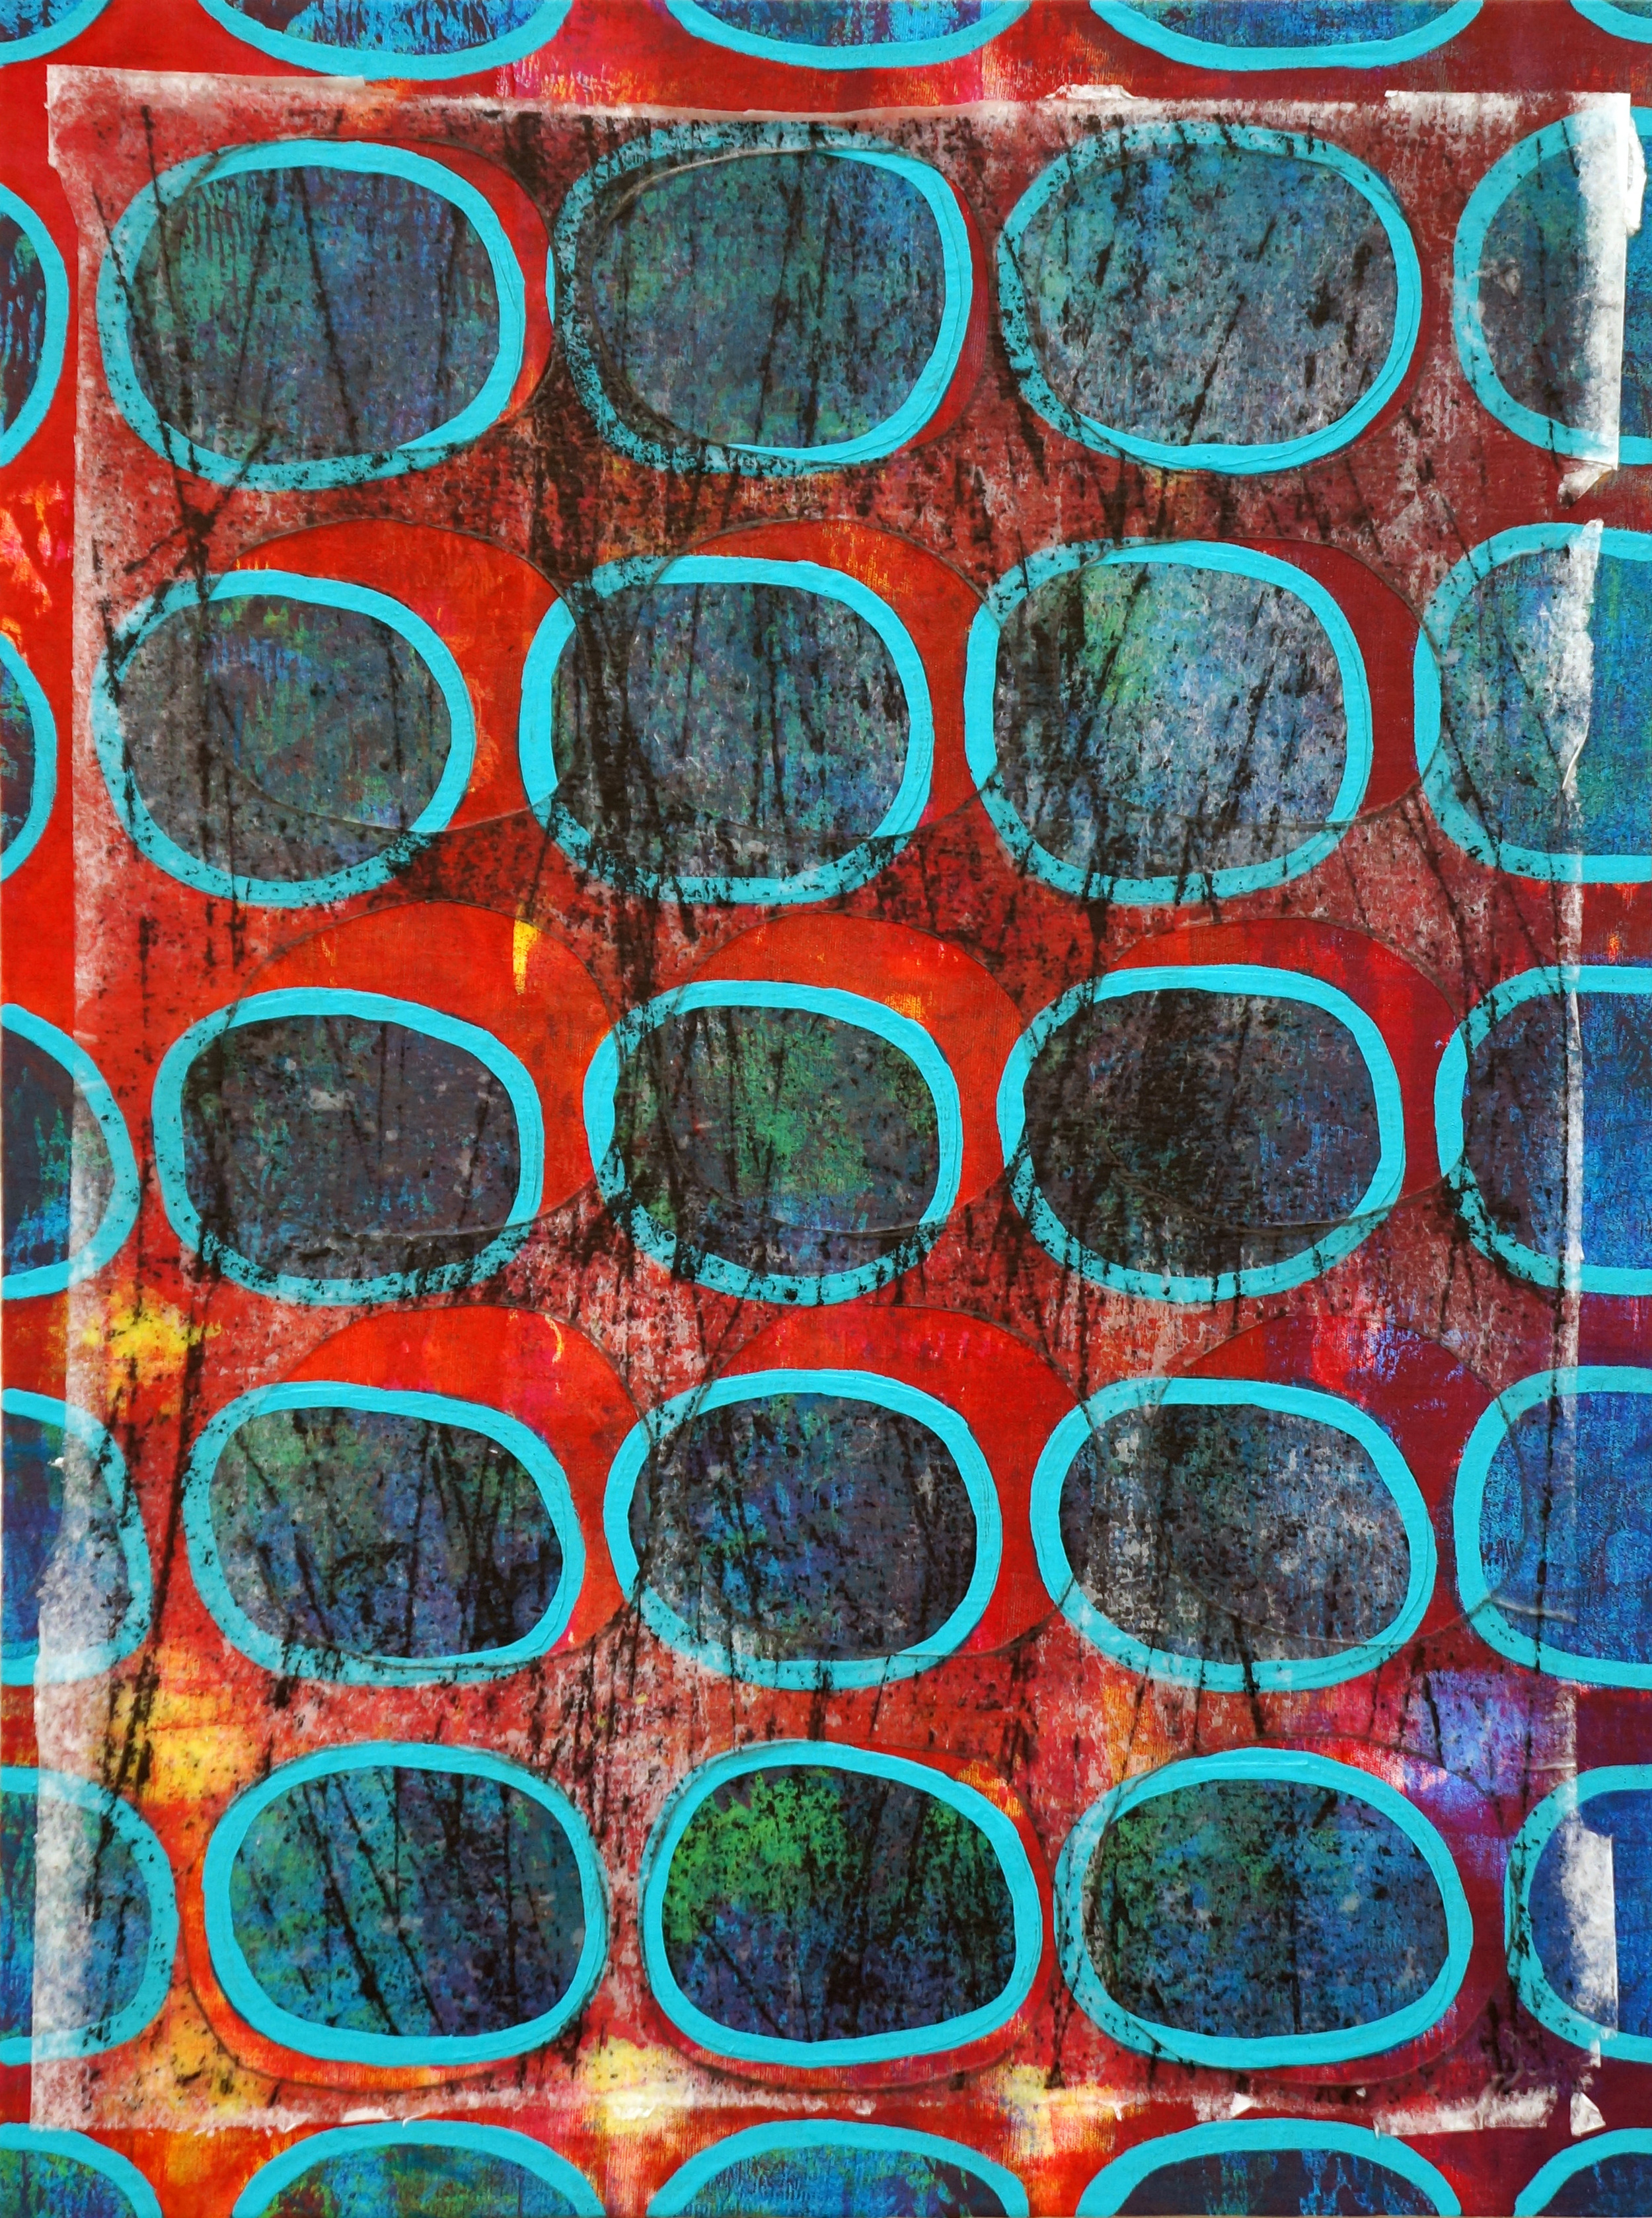  Jeanne Williamson,&nbsp; Bubbles and Cracks on Ice on Fences #2 , mixed media on cradled board, 14x14 